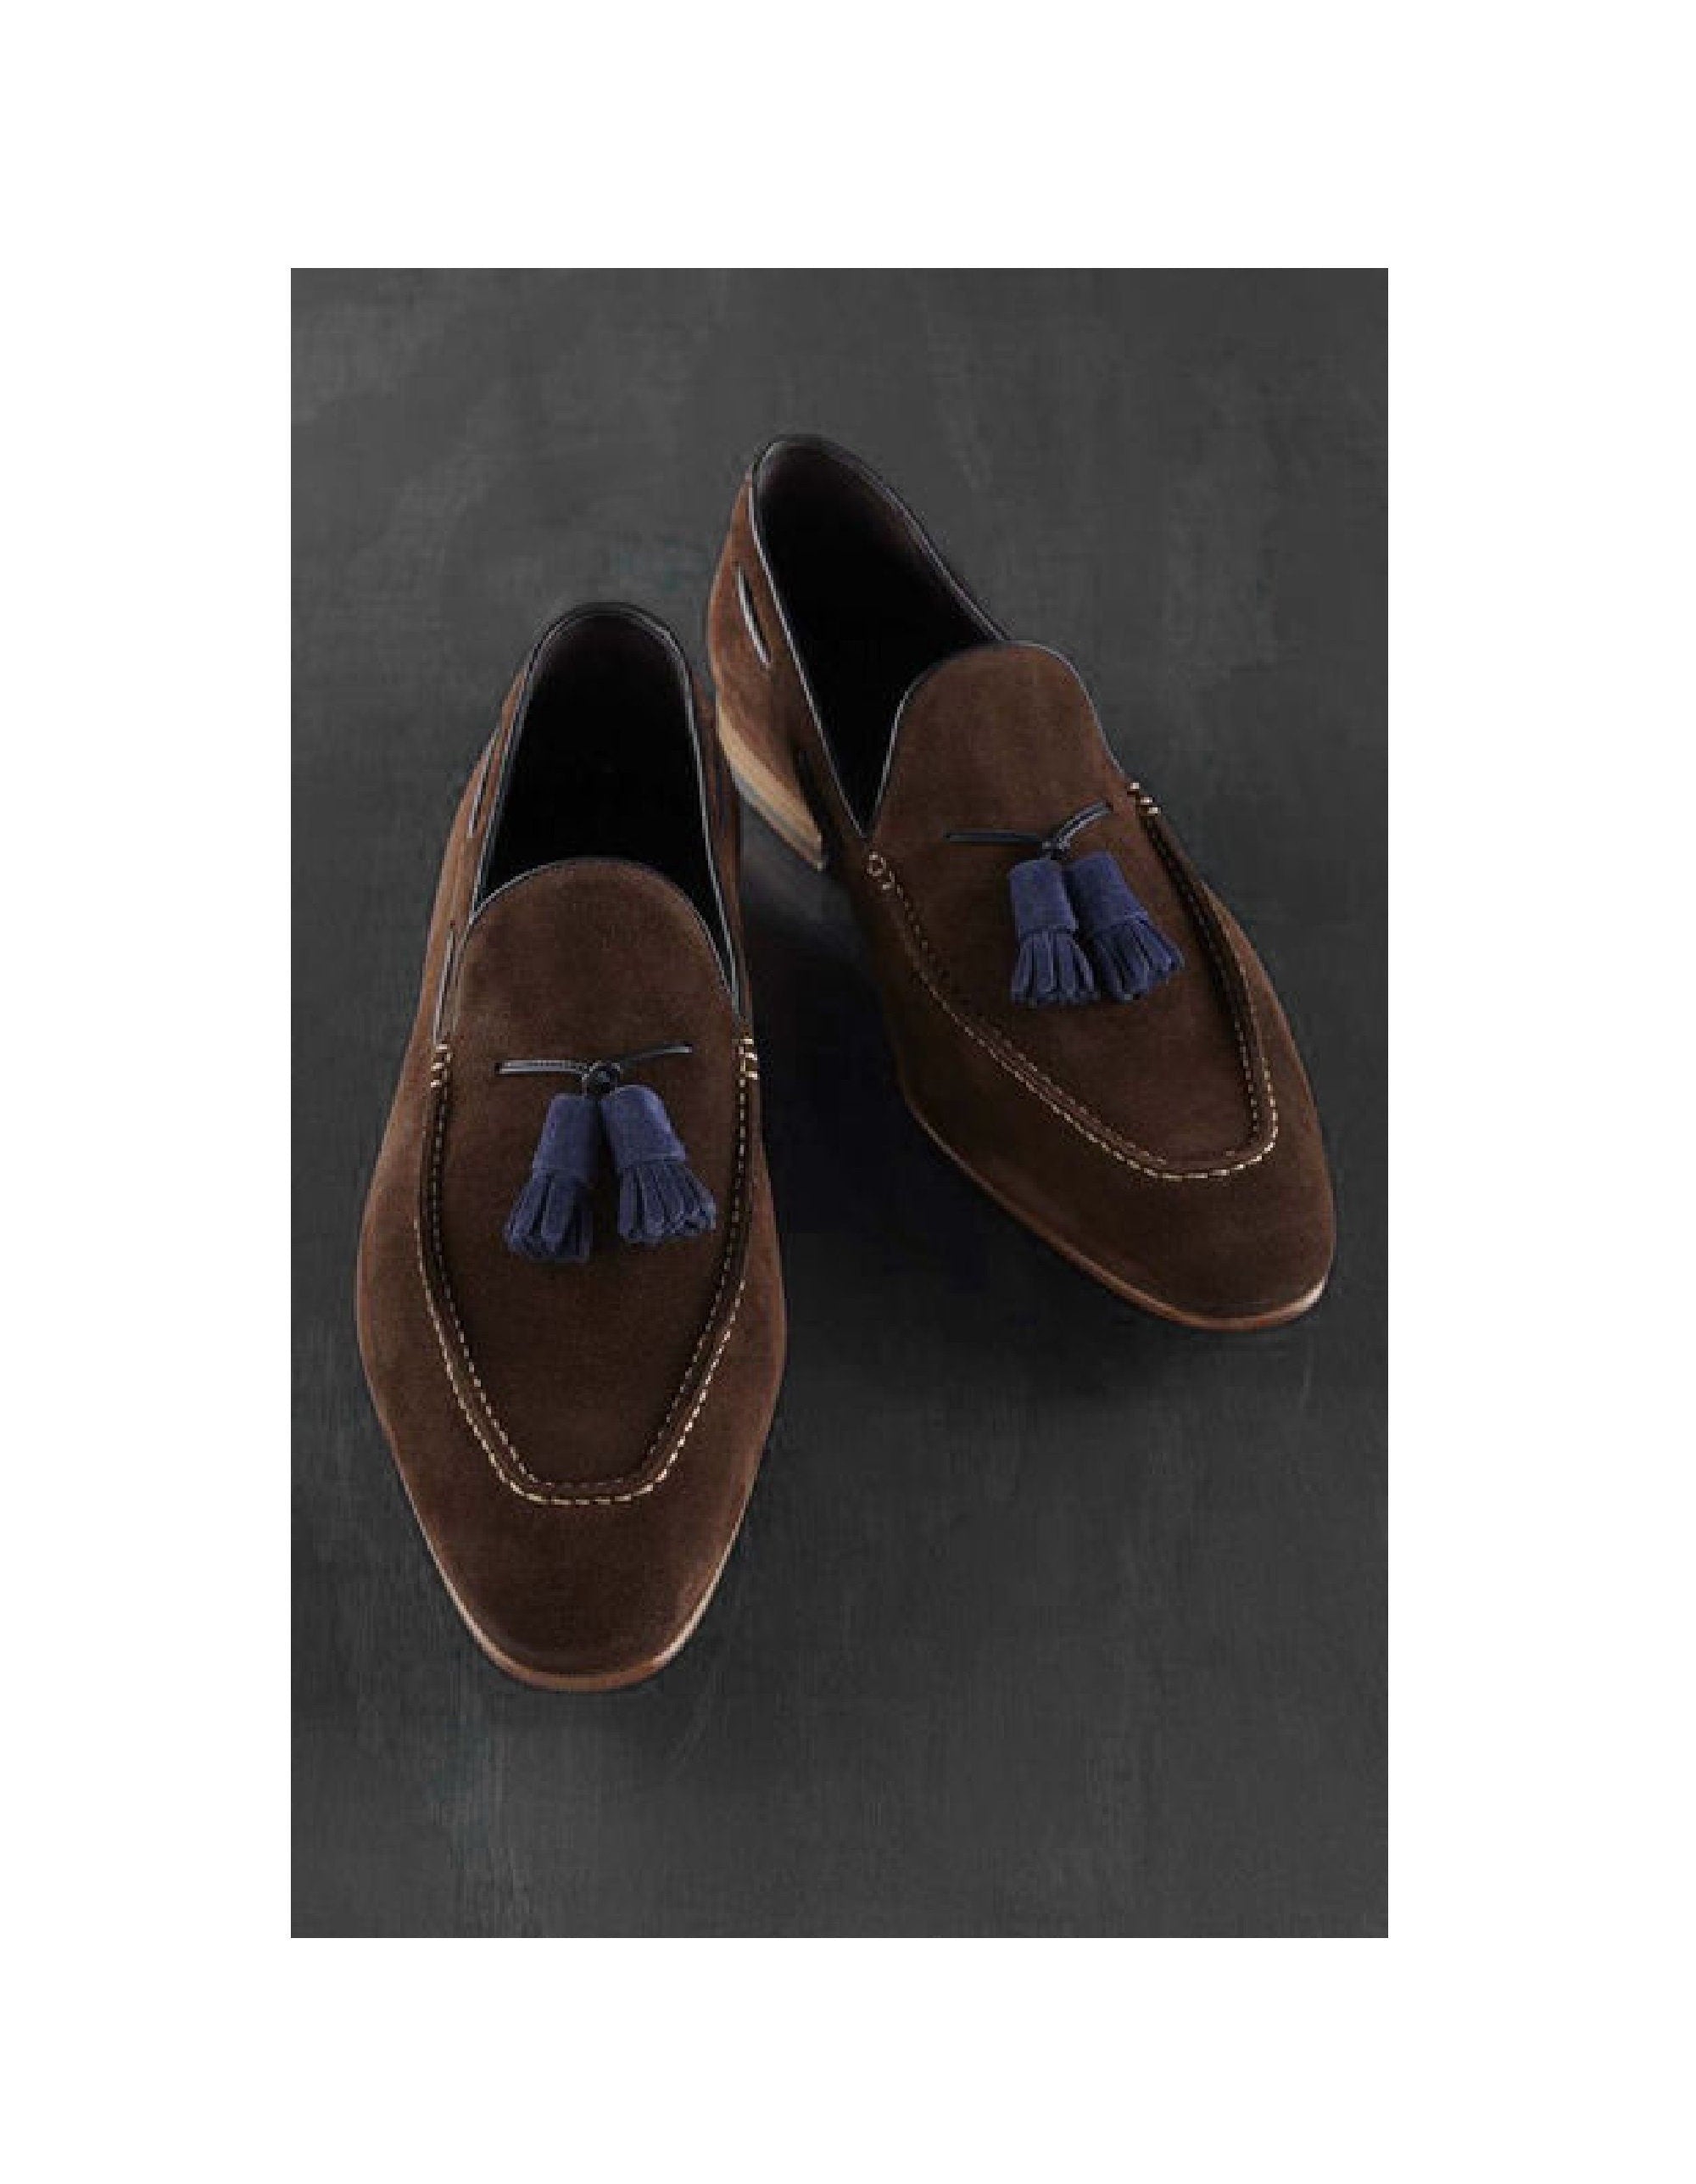 Loafer Slips On Brown Suede Leather Shoes Blue Tassel Rounded Apron Toe Handmade